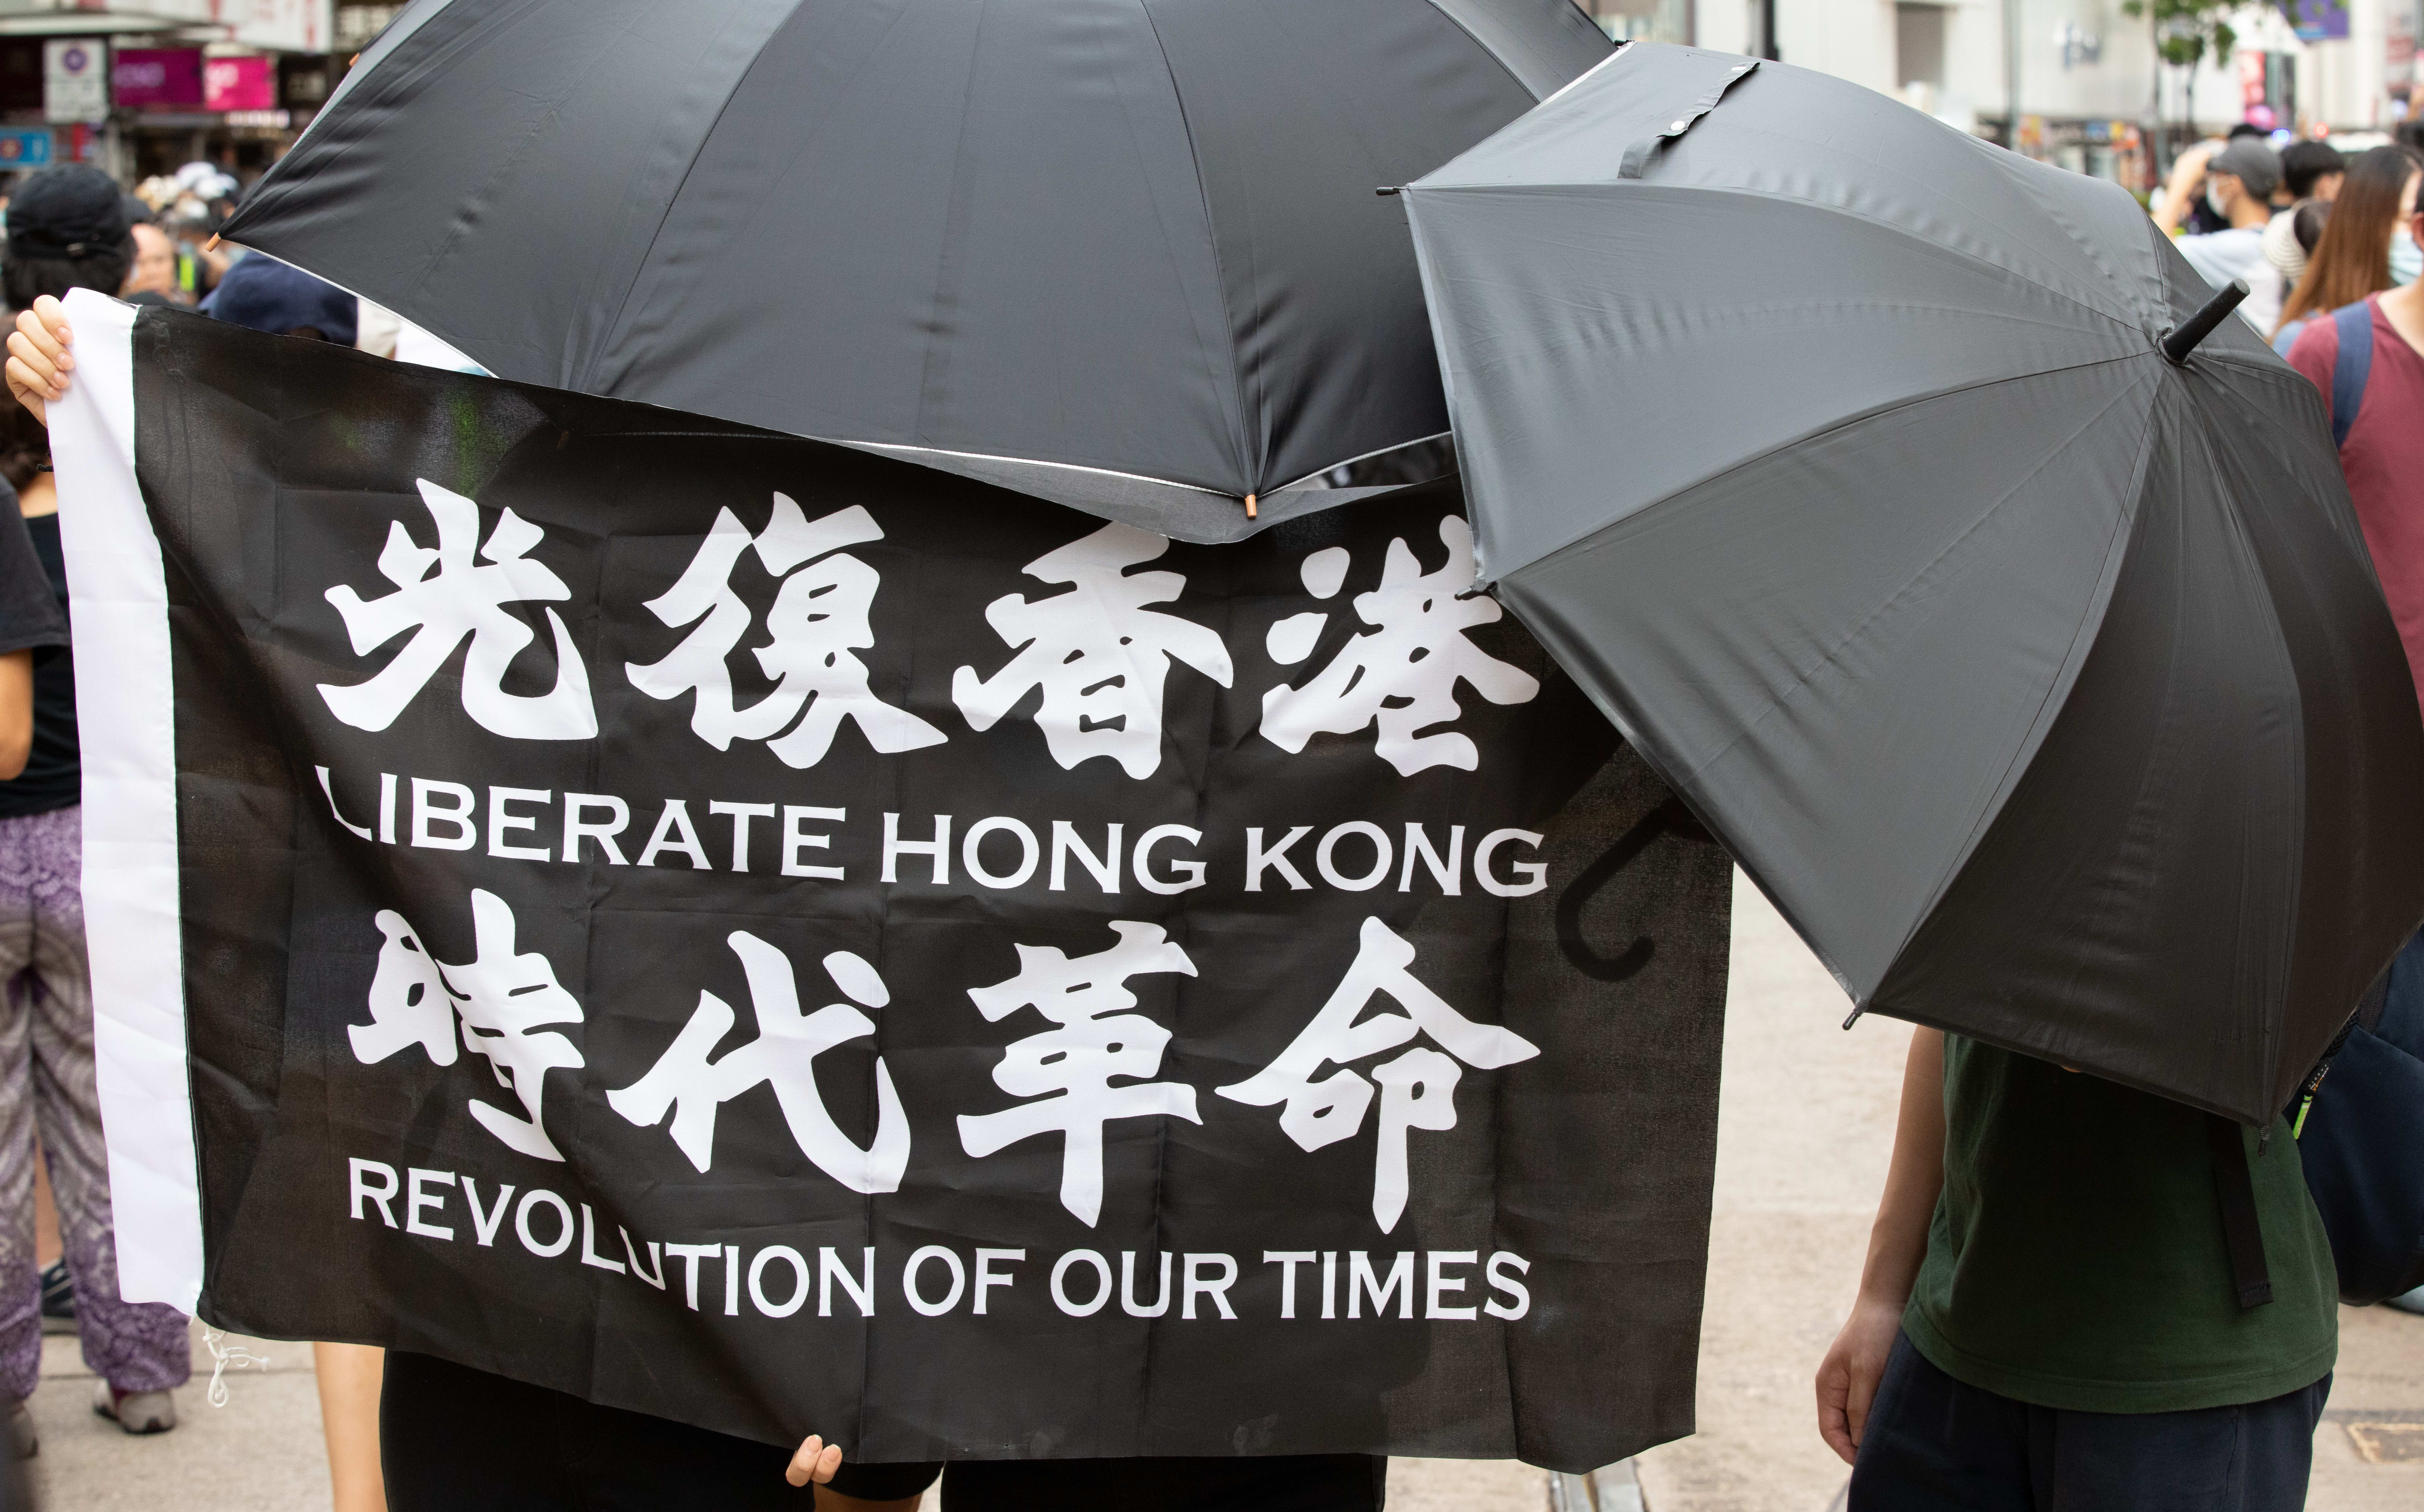 Protesters hold a "Liberate Hong Kong, Revolution of our times" flag while covering their face due to the now introduced National Security Law in Hong Kong, China, on July 1, 2020.